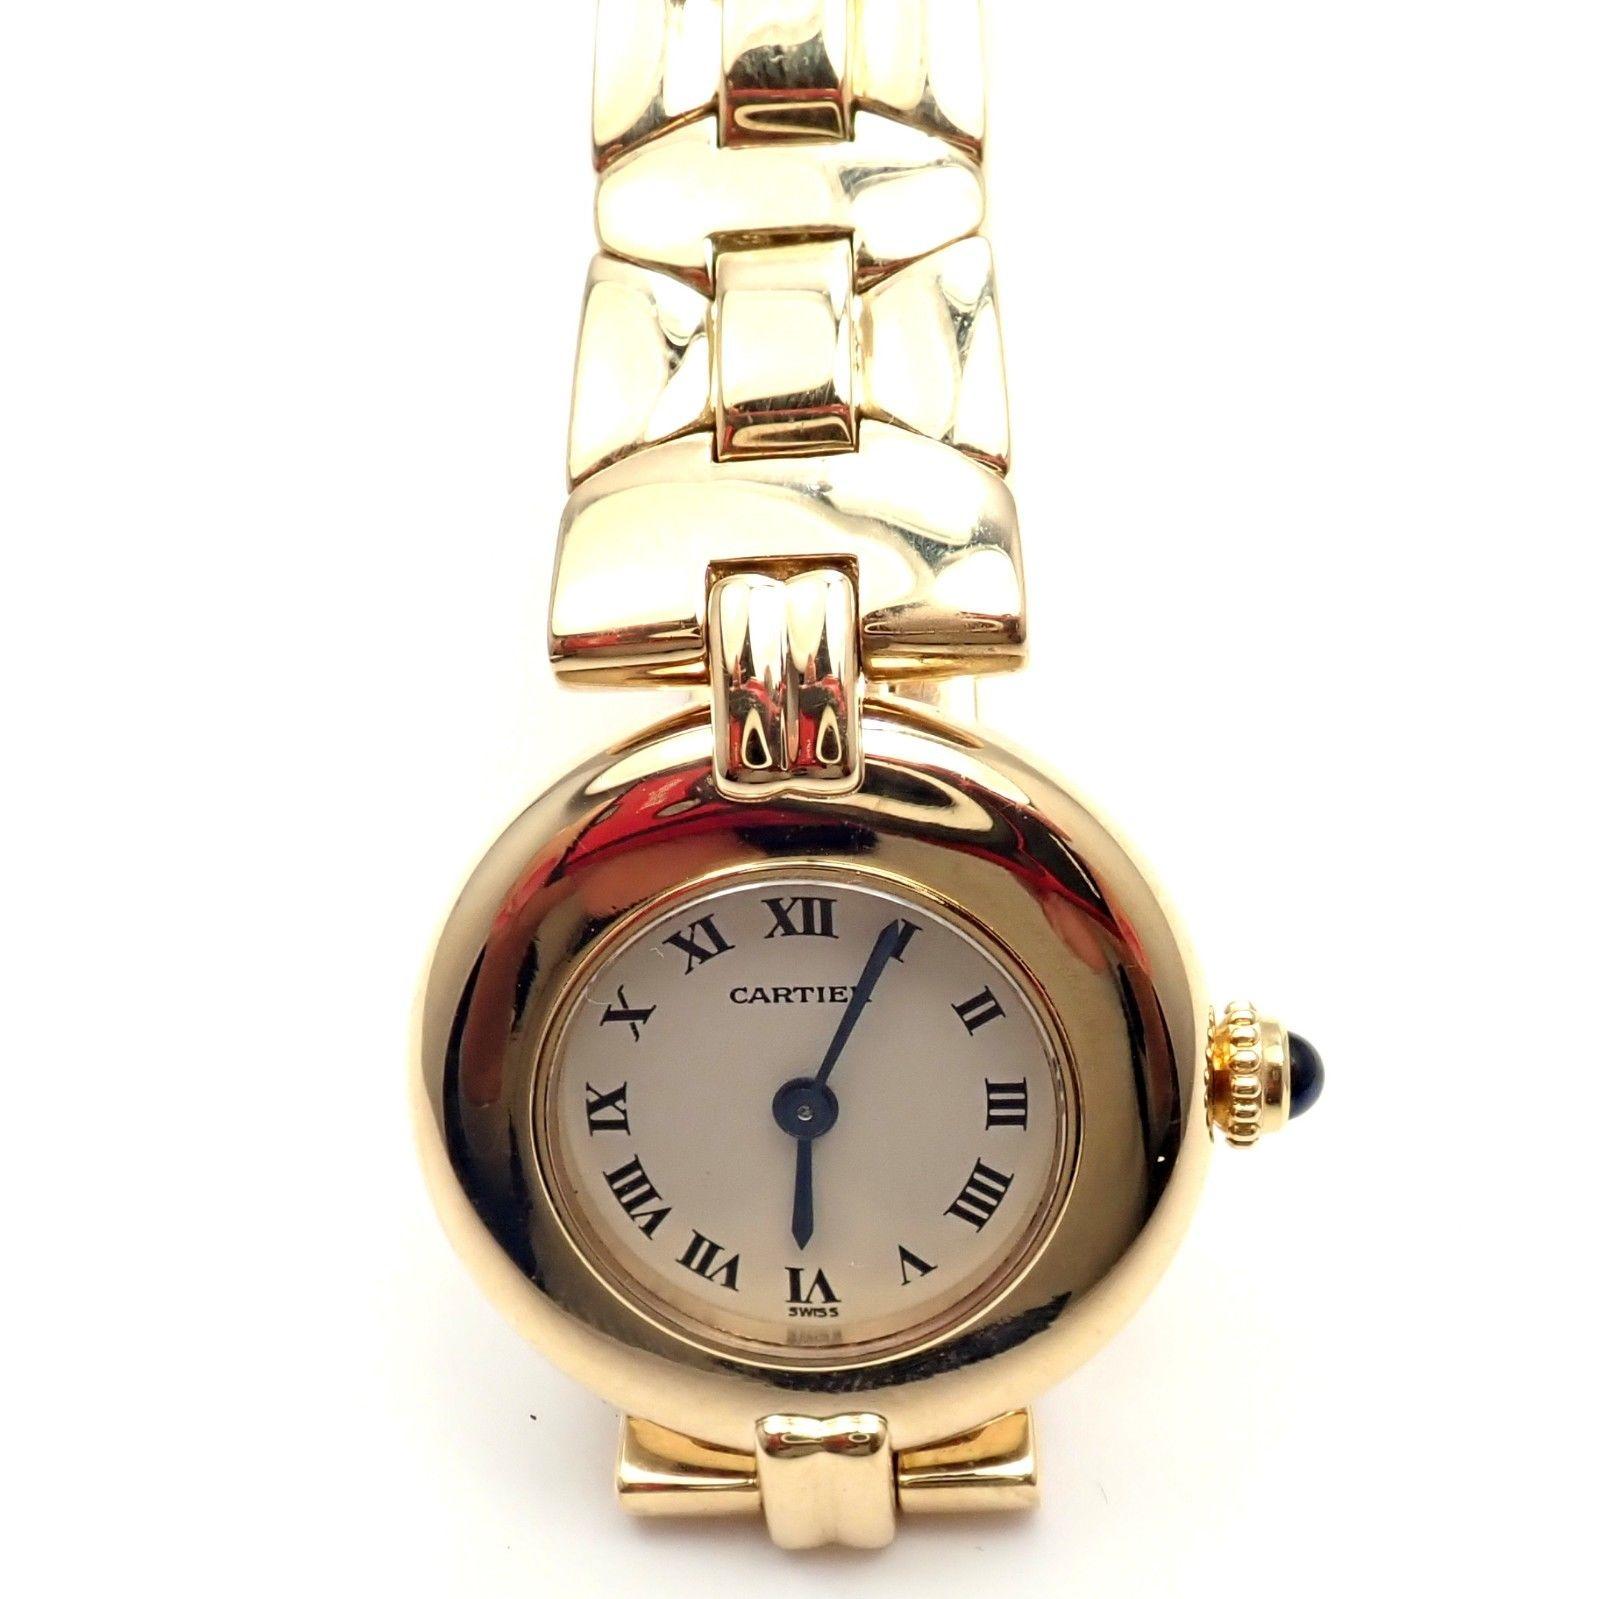 18k Yellow Gold Rivoli Lady's Wristwatch by Cartier with Quartz Movement. 
Great Working Condition
Rare Style 0297
Details: 
18k Yellow Gold Band + Case with folding clasp 
Case Dimensions: 23mm
Watch Length: 7